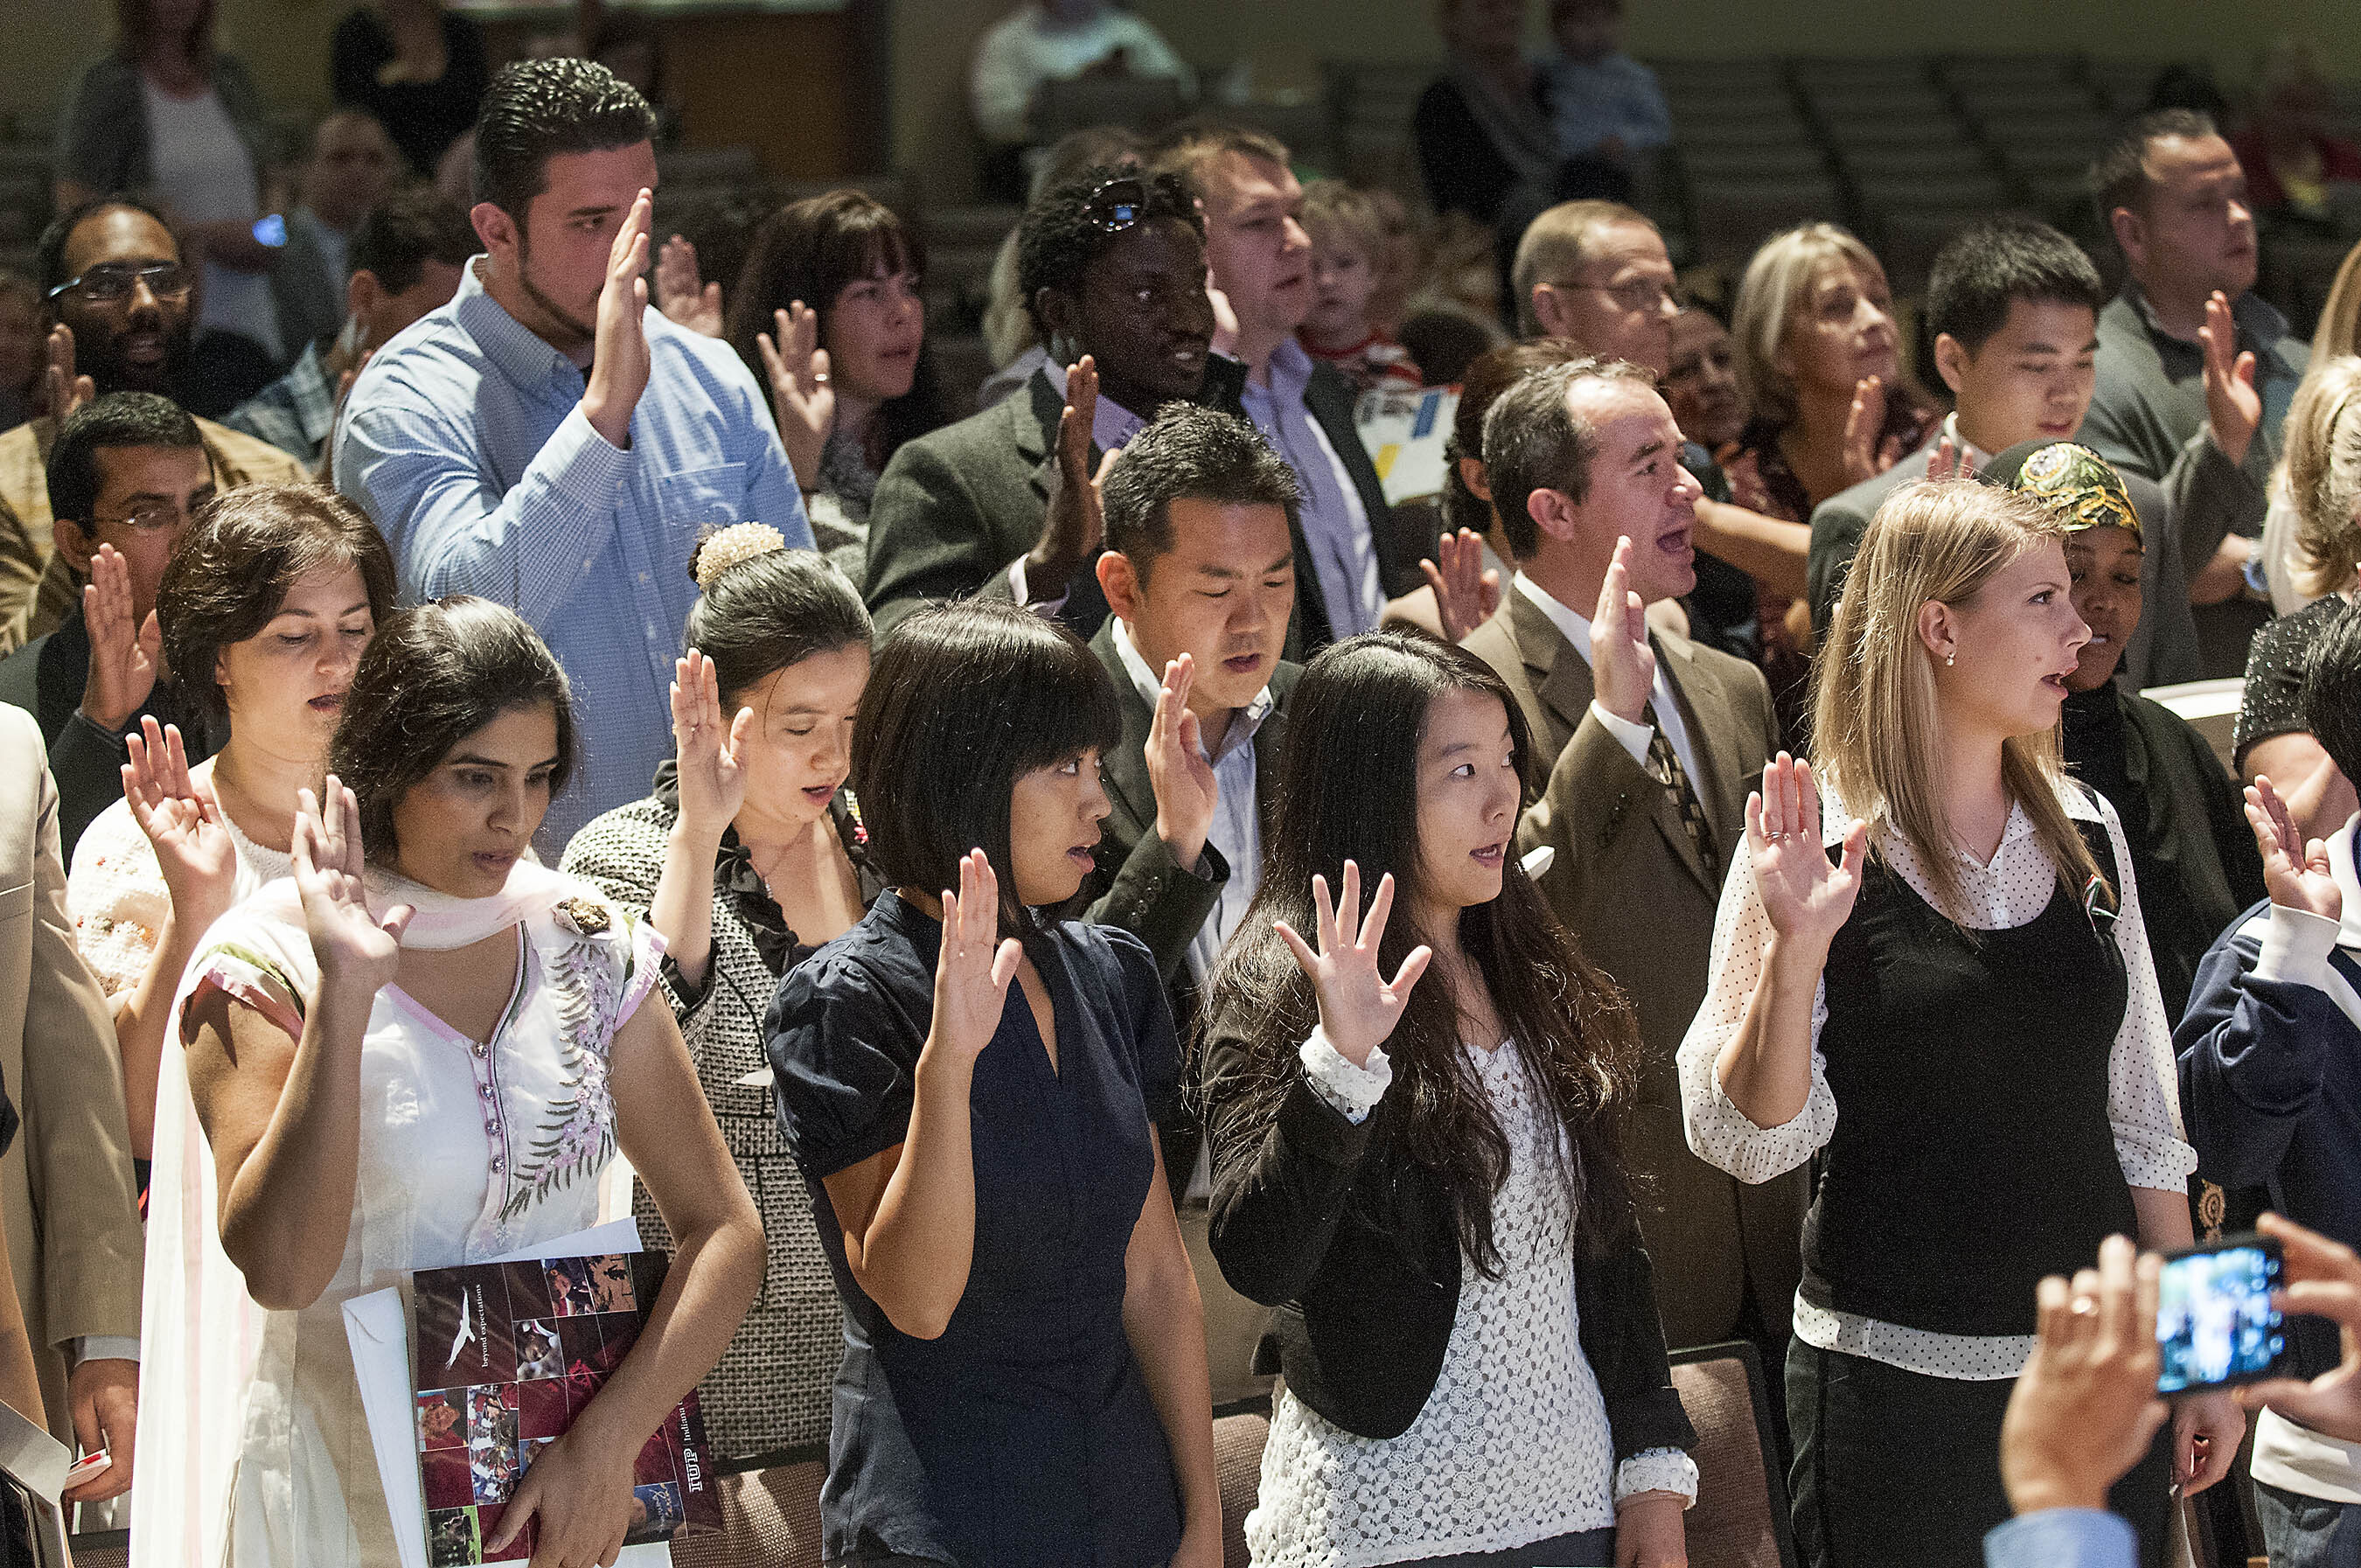 A group of people stand during a citizenship naturalization program